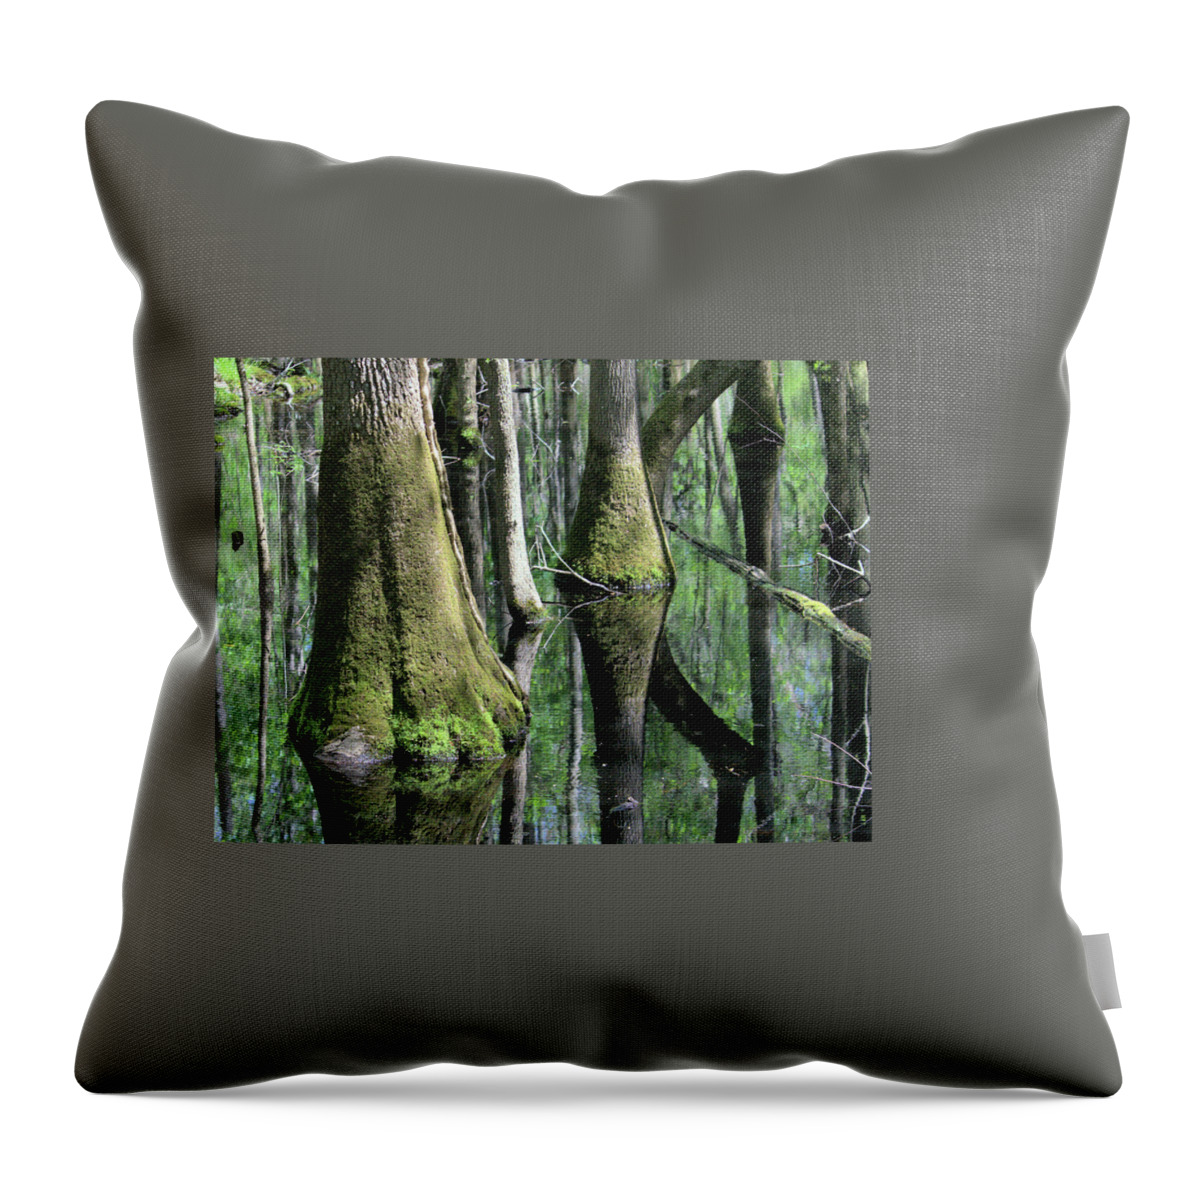 Swamp. Land Throw Pillow featuring the photograph Congaree National Park by Cathy Harper